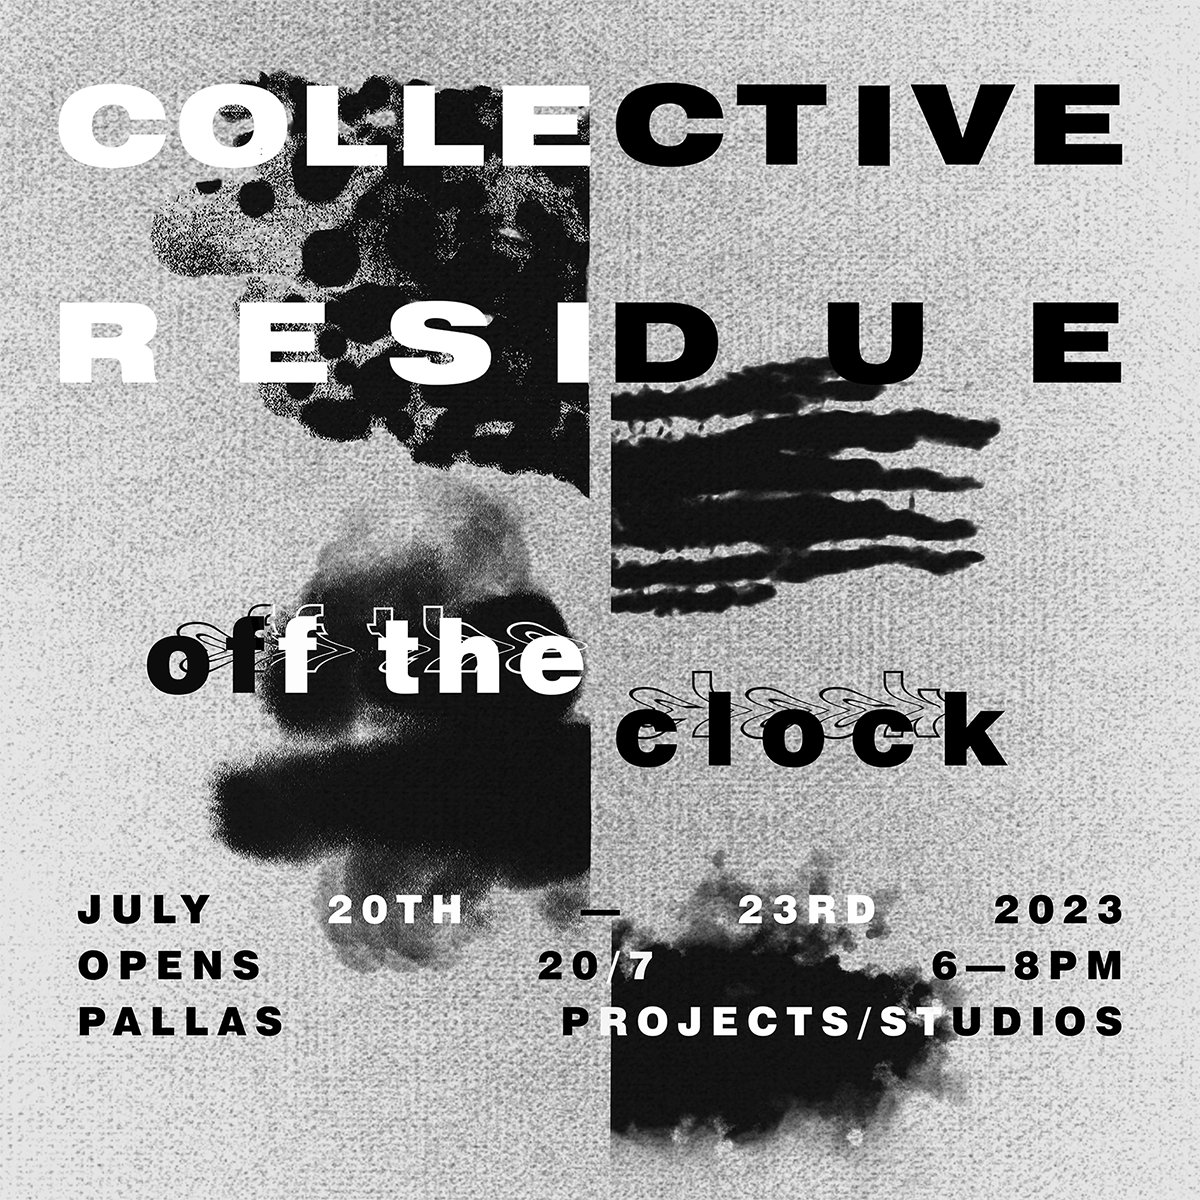 TODAY!
Collective Residue—off the clock

Preview: 6–8pm Thursday 20th July
Continues until Sunday 23rd
~
Performance: REMNANTS OF LANGUAGE by Maria Escarpenter at 6:30pm
~
@artscouncil_ie 
~
#arts #artsworkers #collective #contemporary